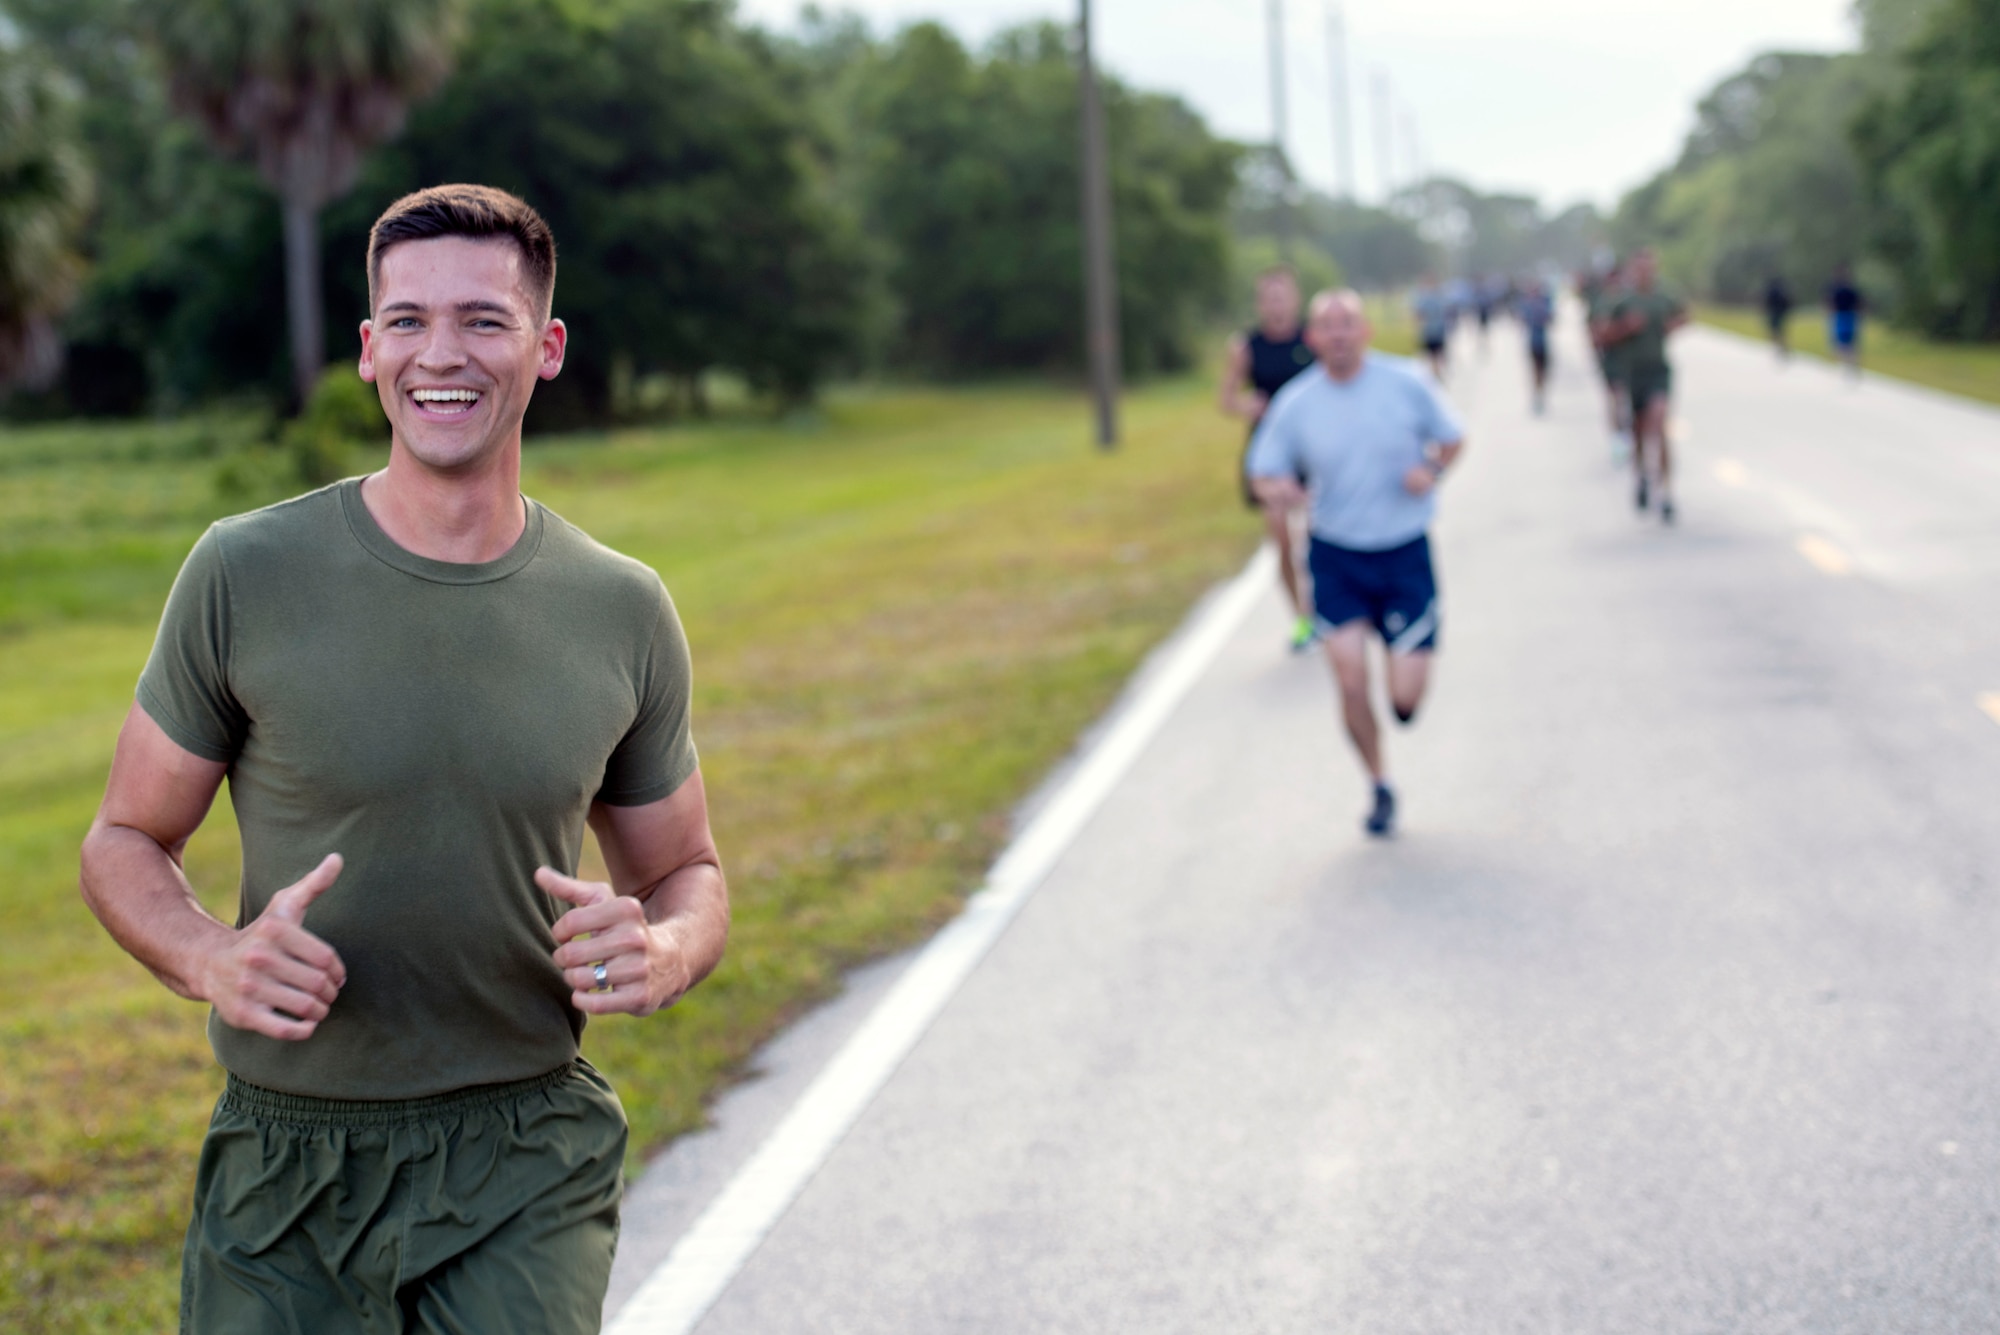 U.S. Marine Corps Sgt. Ethan Dick, a U.S. Marine Corps Forces Central Command financial management resource analyst, participates in Sexual Assault Prevention and Response 5K run at MacDill Air Force Base, Fla., April 5, 2019.